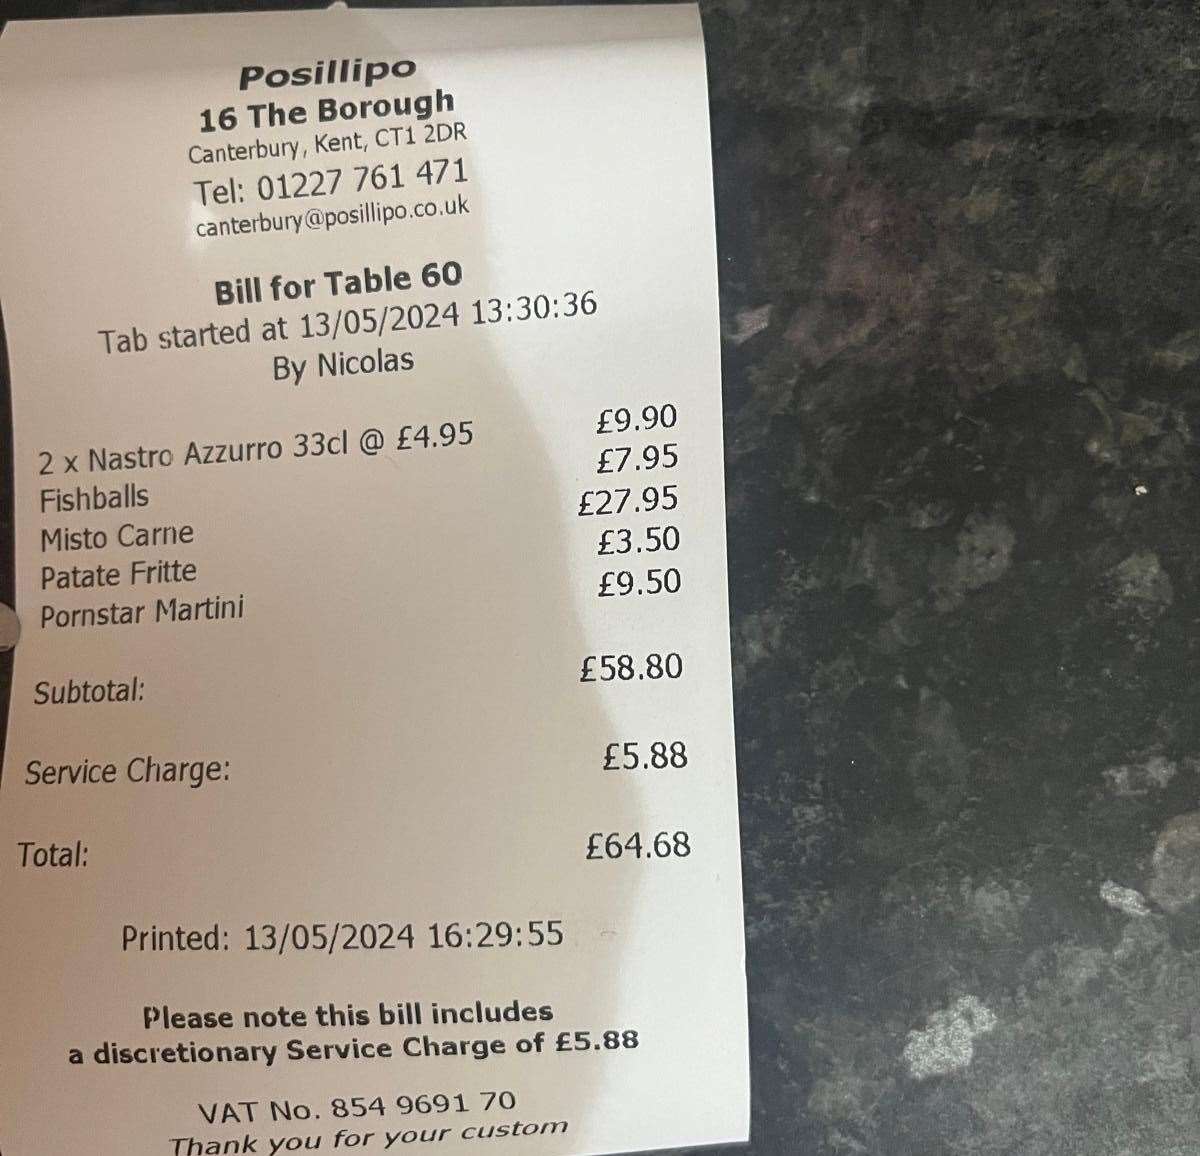 The receipt for the meal at Posillipo Canterbury